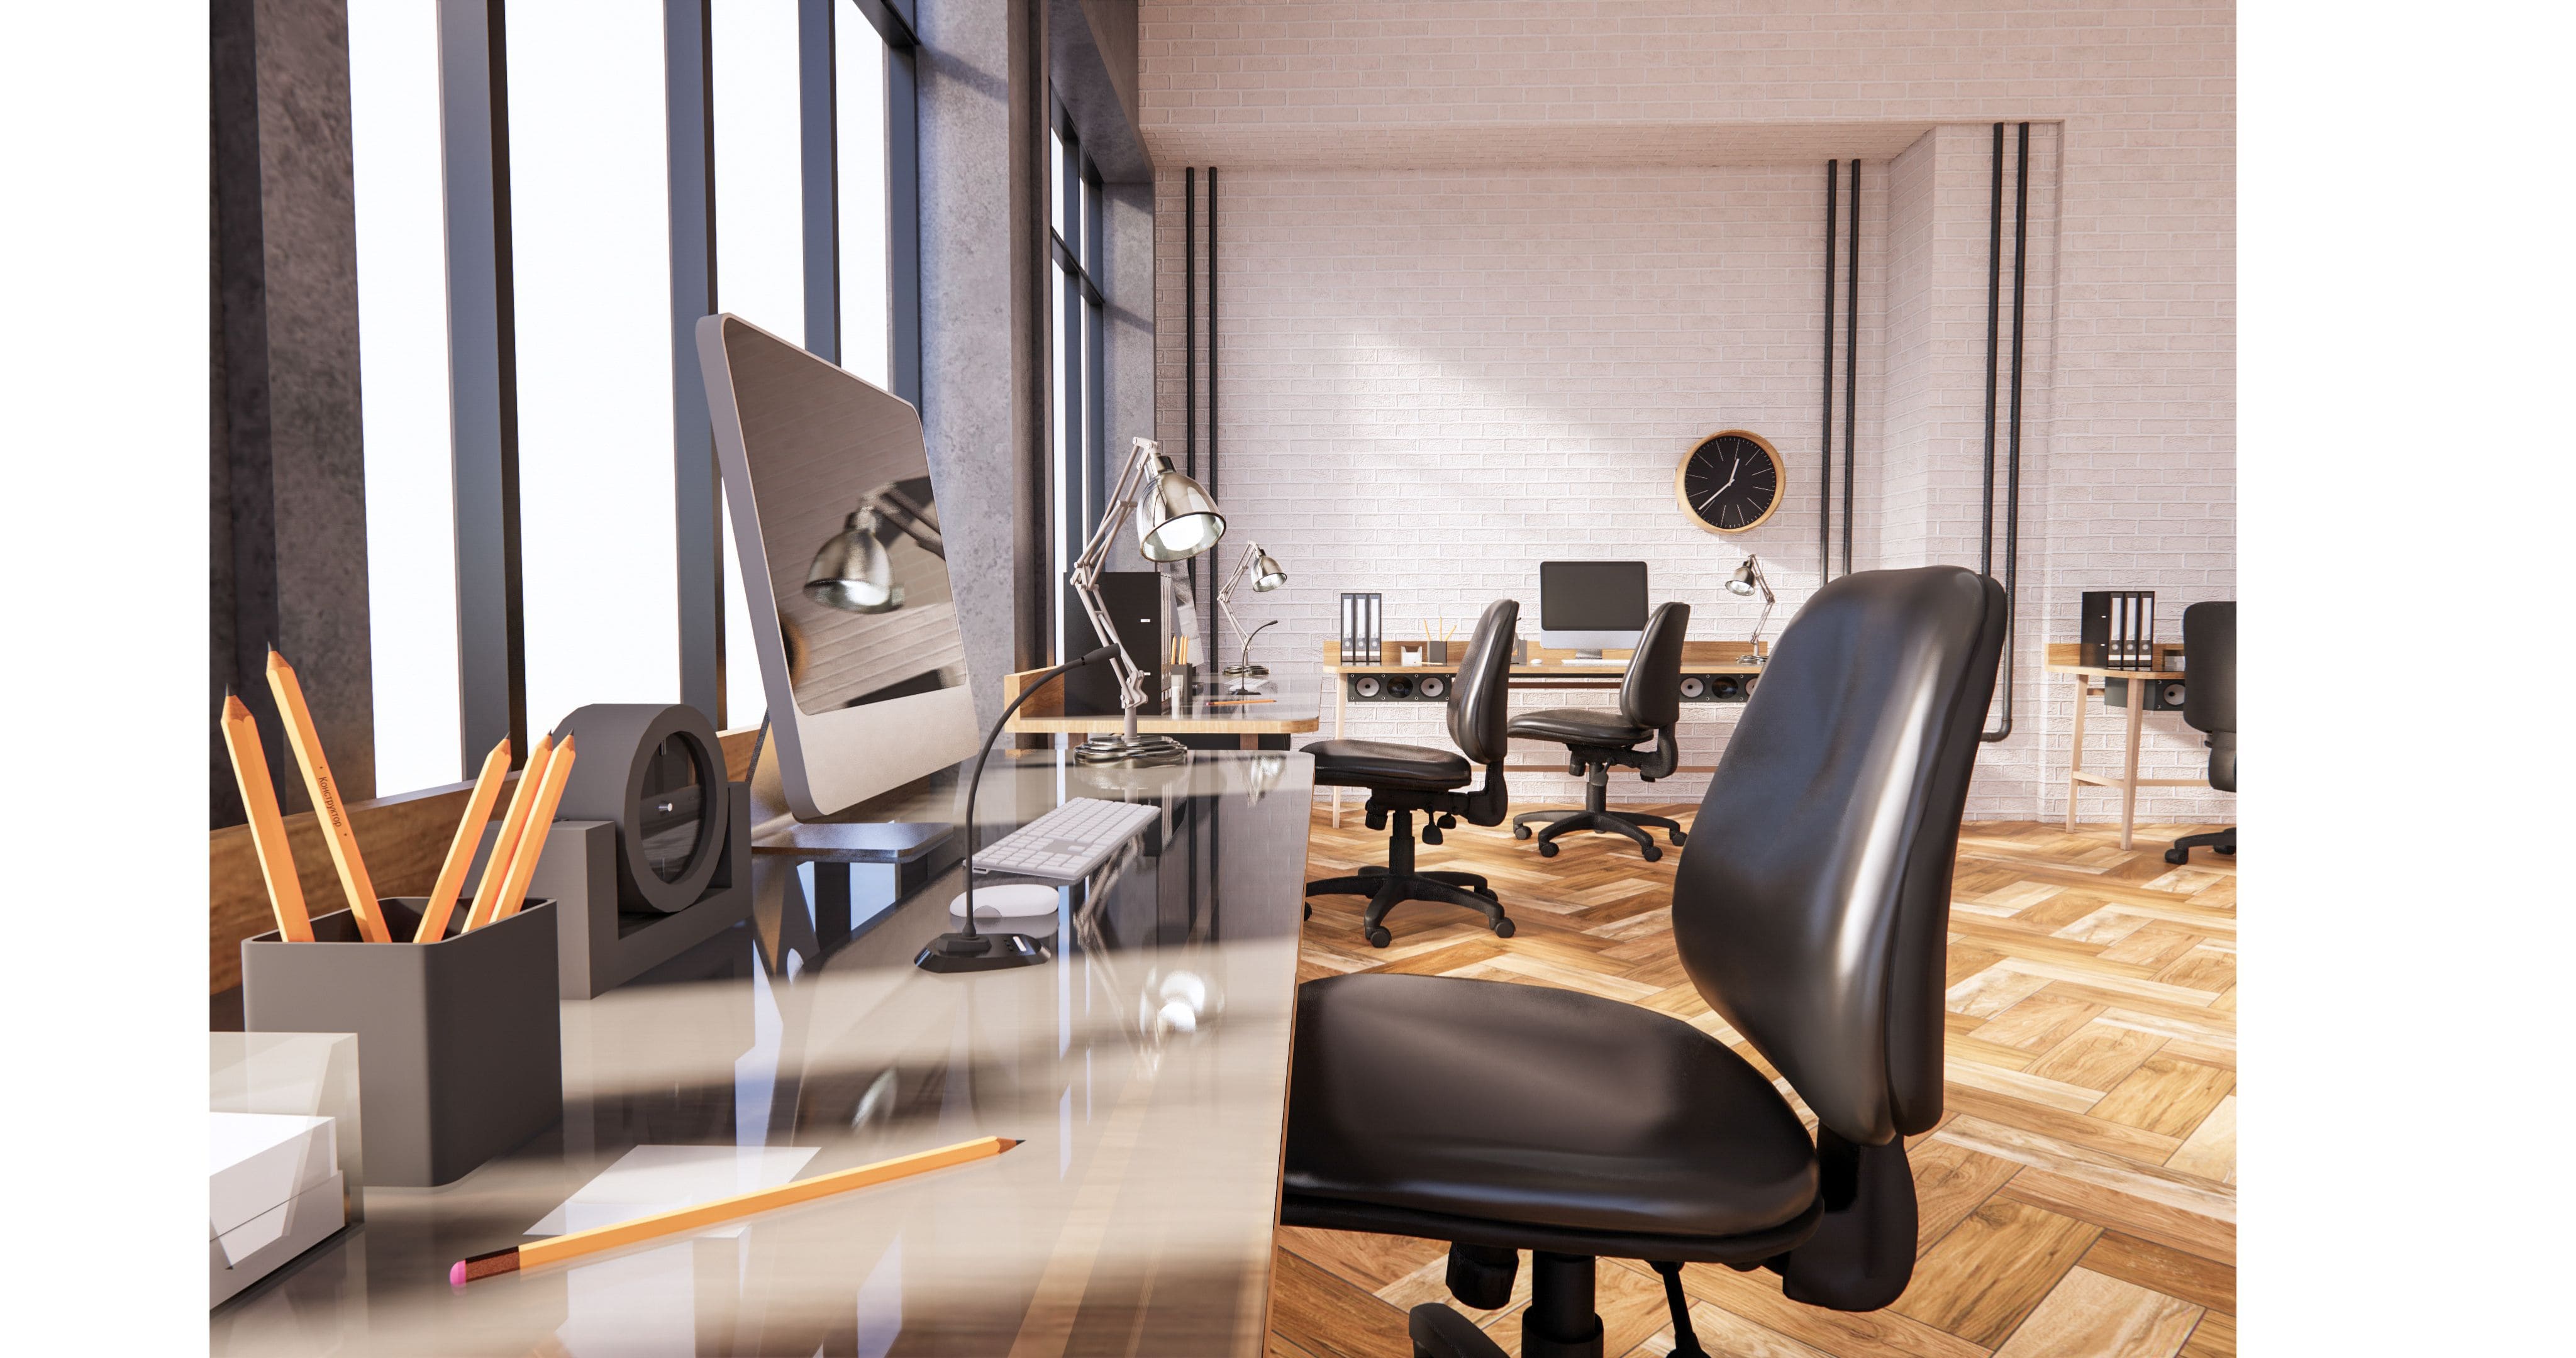 A clean office that has been professionally cleaned by a commercial officer cleaner to help boost productivity.